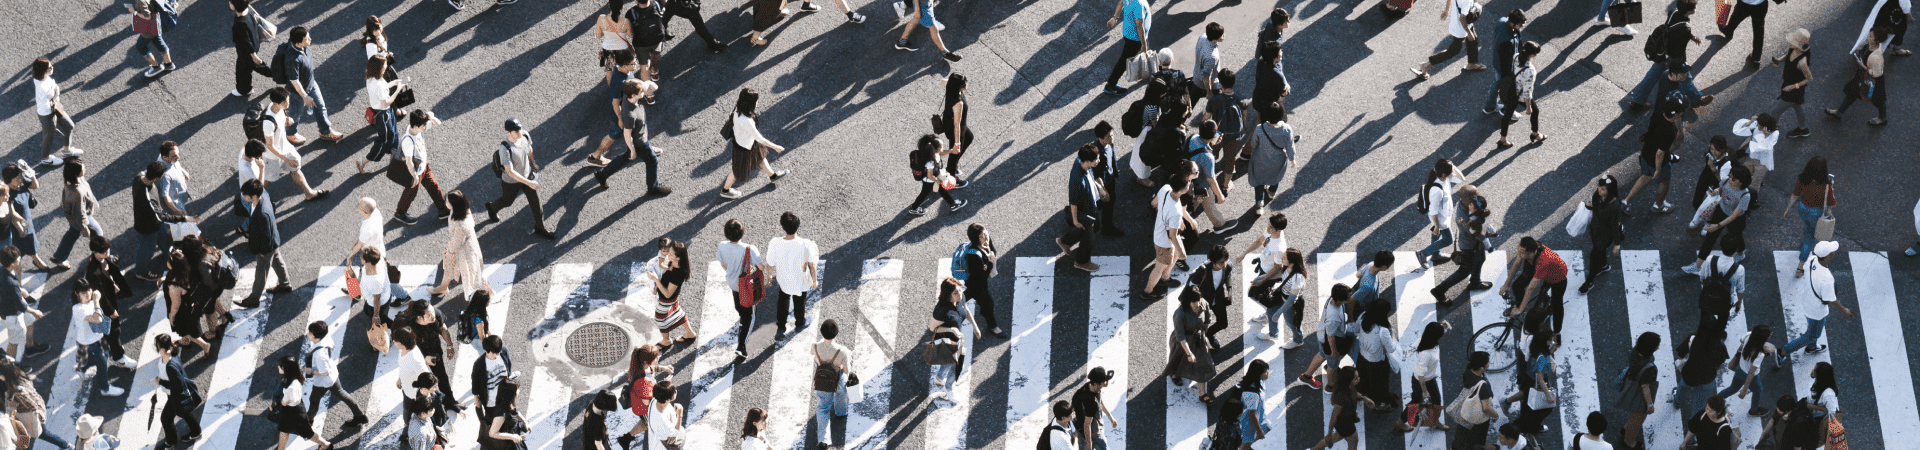 Top view of a crowd crossing a cross walk